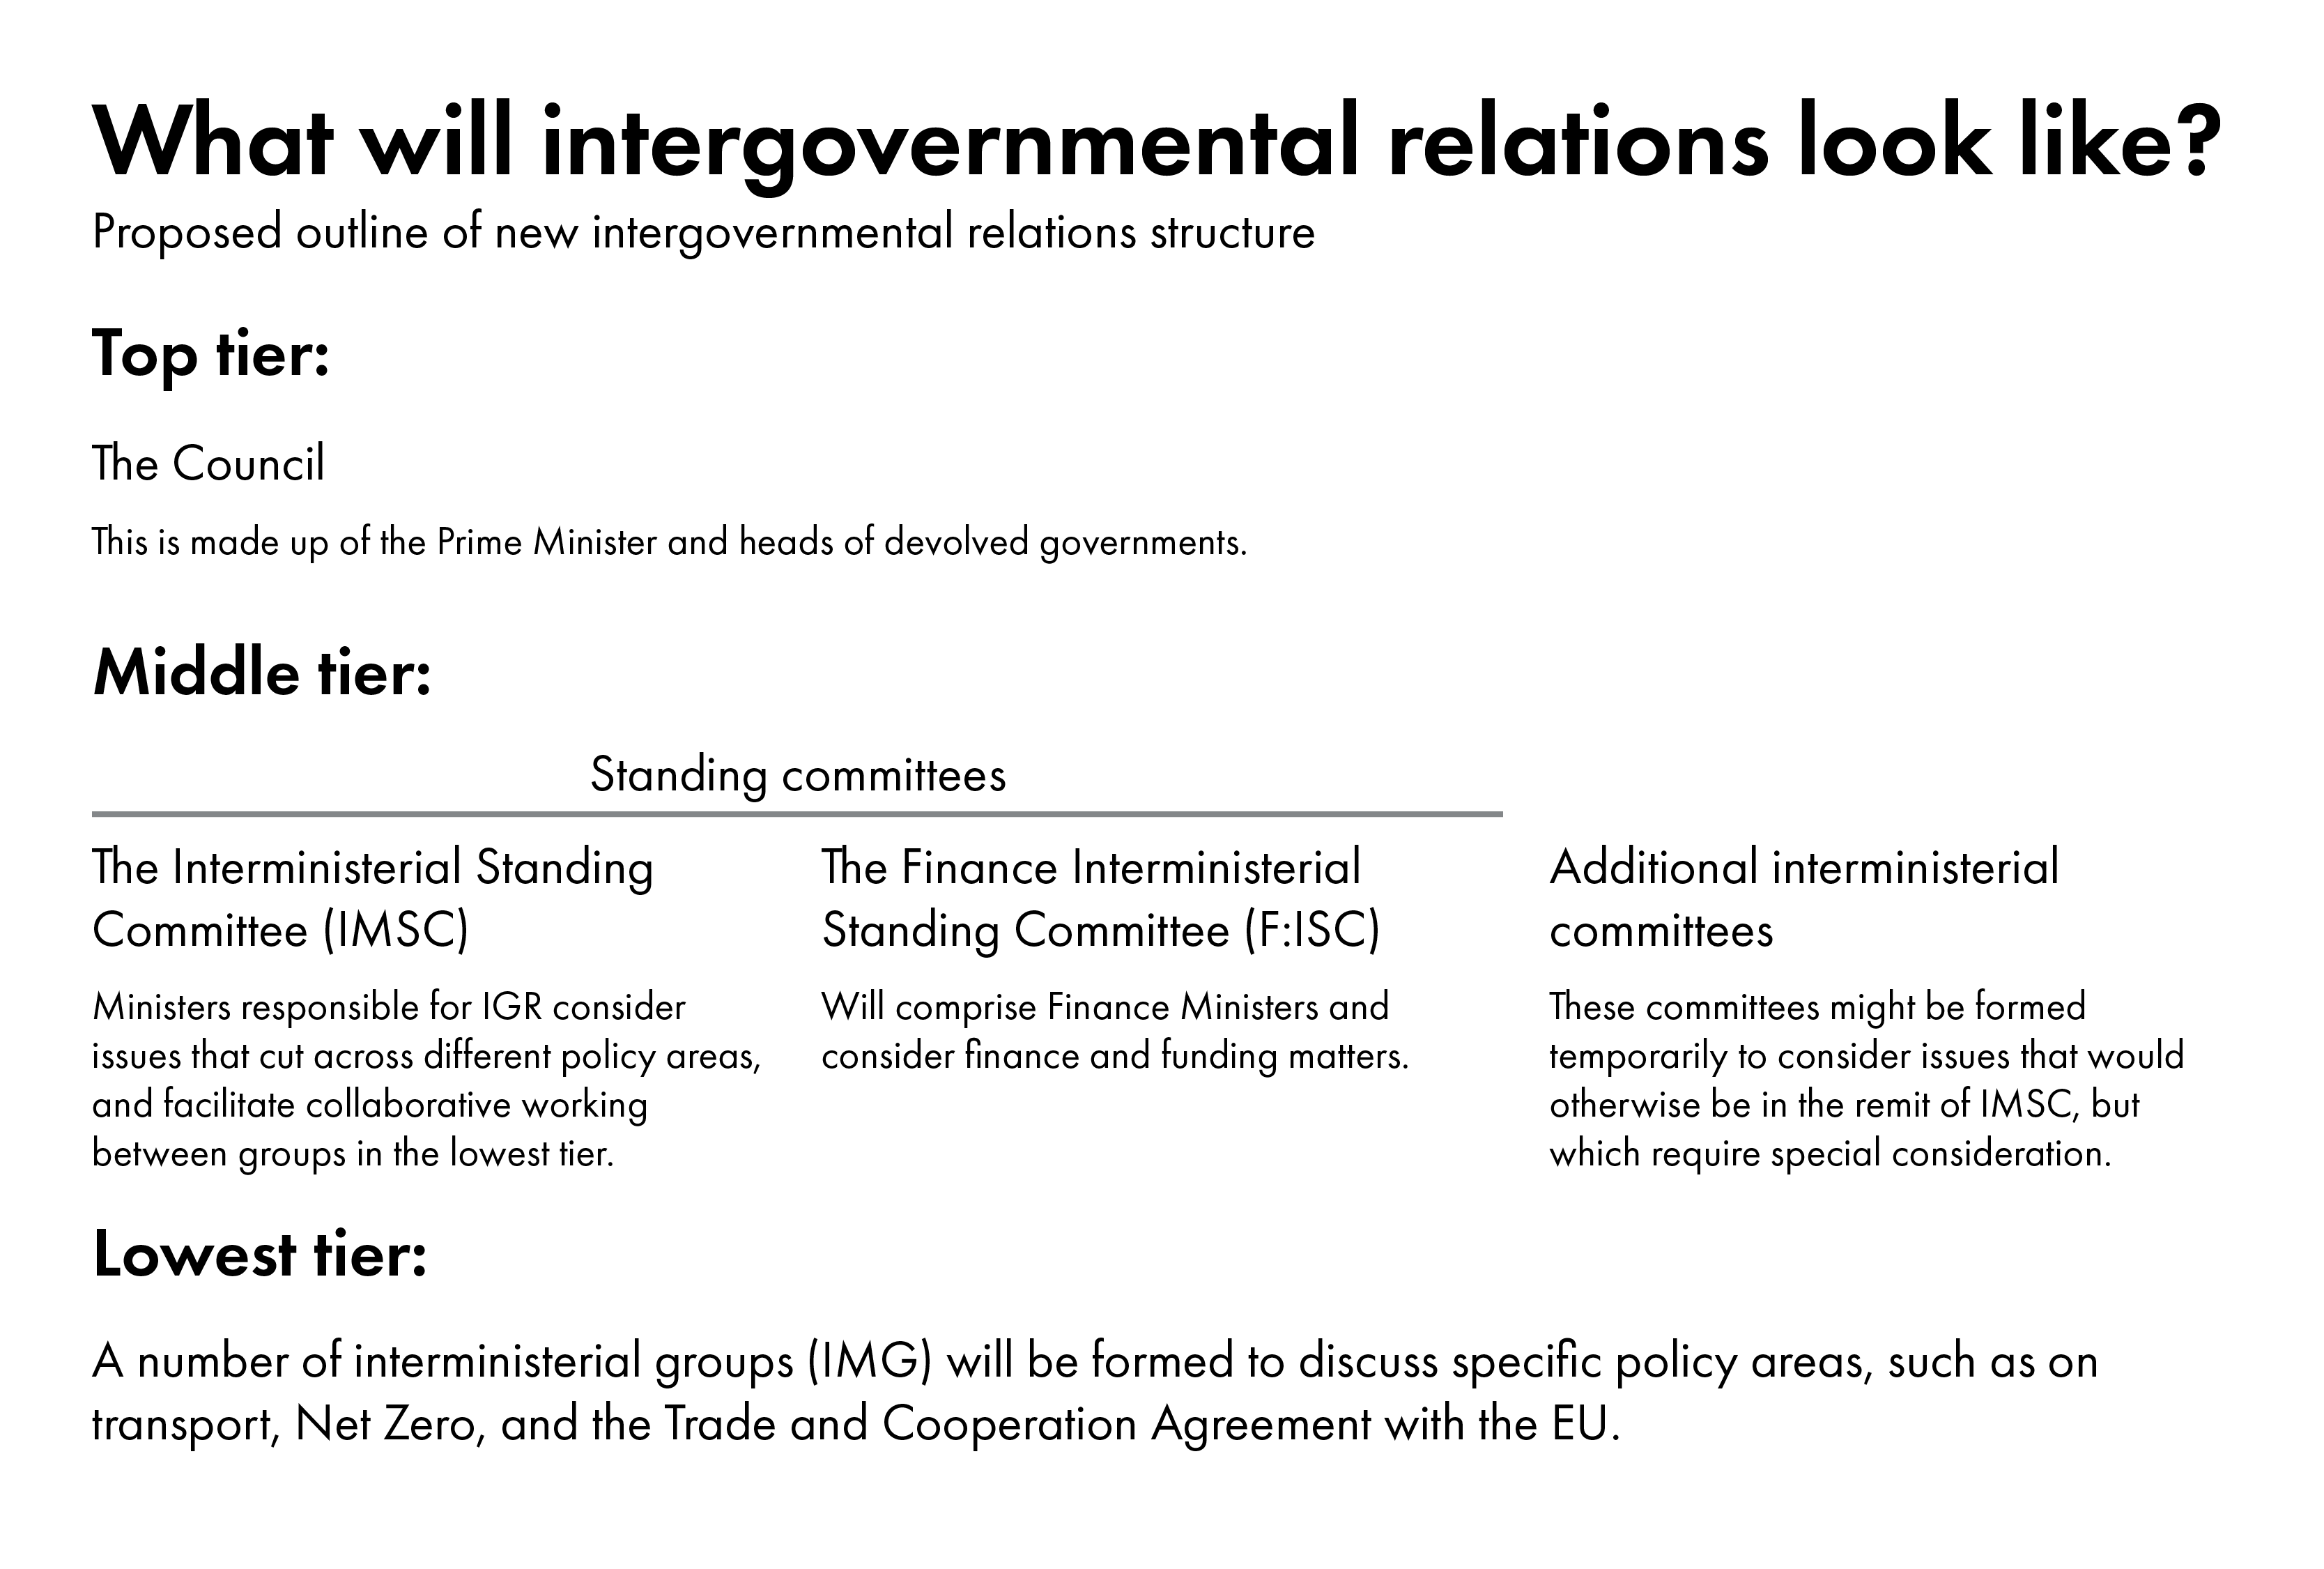 Image showing the proposed structure for intergovernmental relations